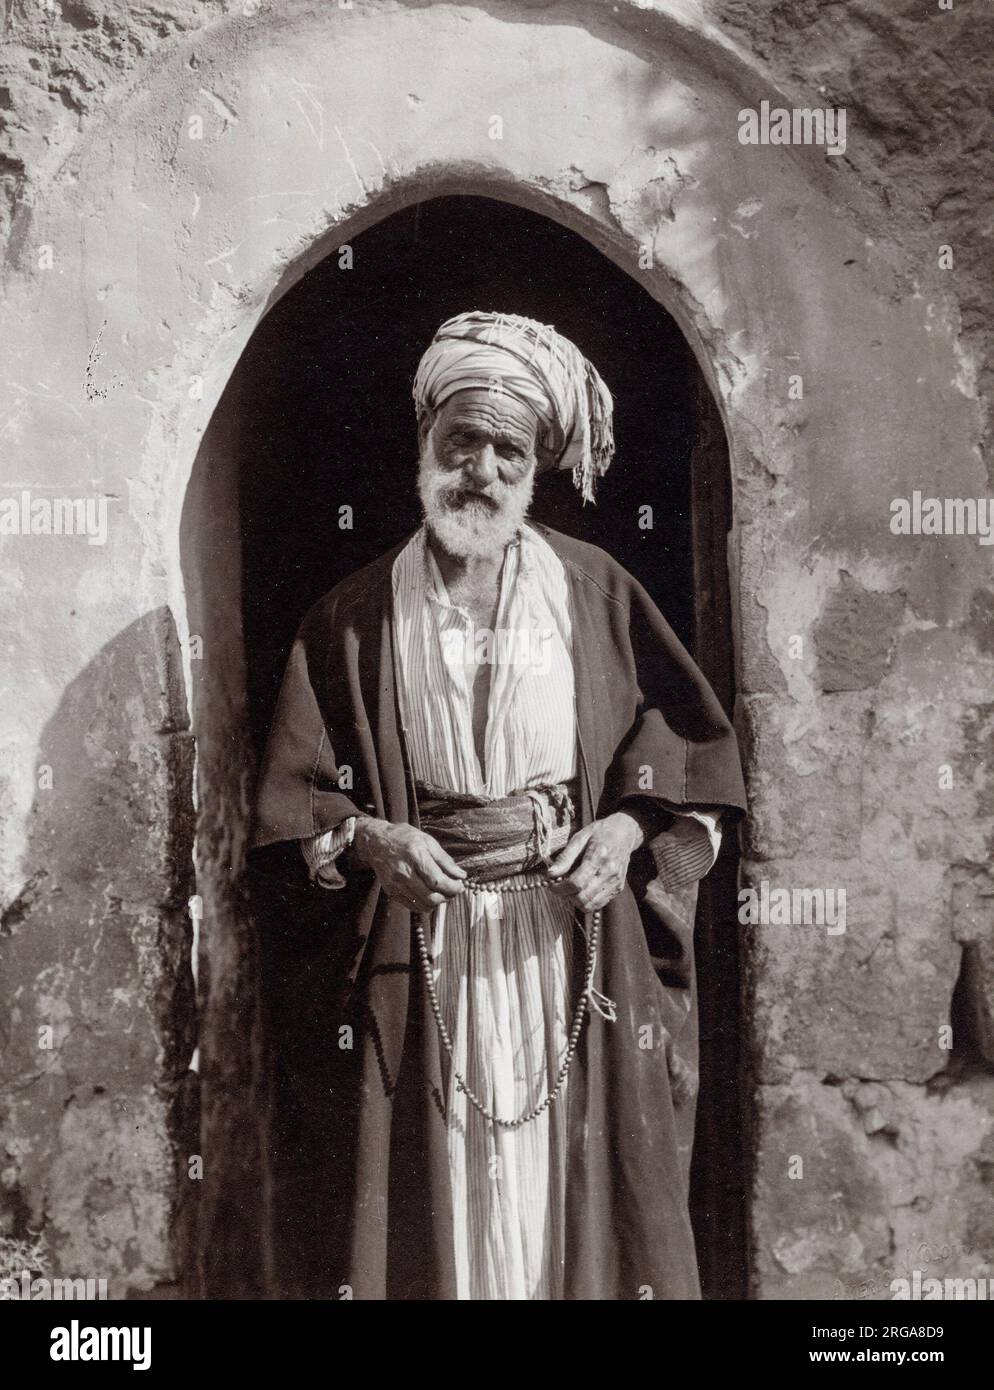 Vintage early 20th century photograph - village chief or sheikh with beads Stock Photo